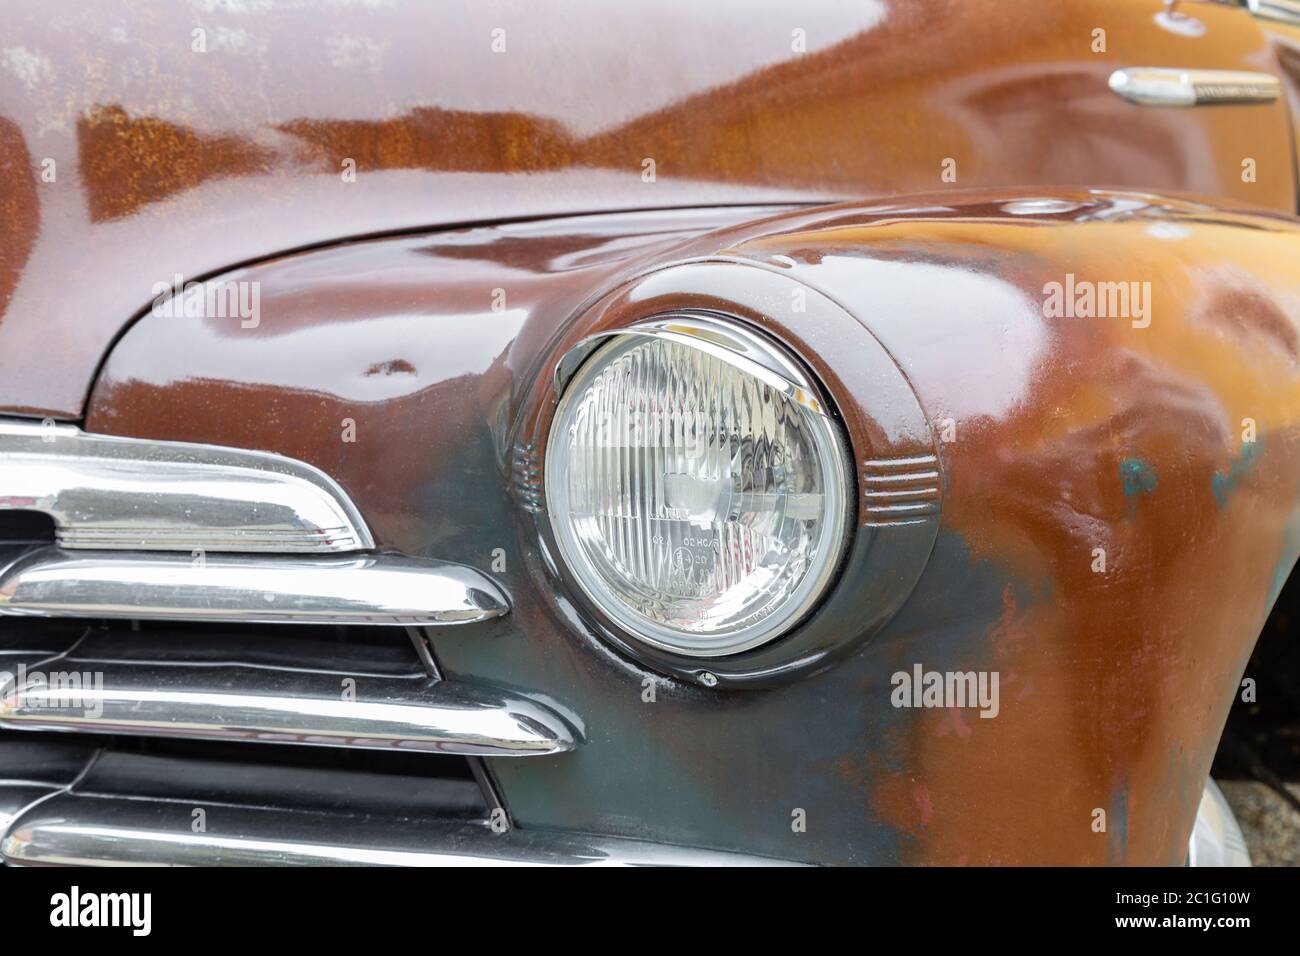 Headlight and grille of a 1940s American sedan Stock Photo